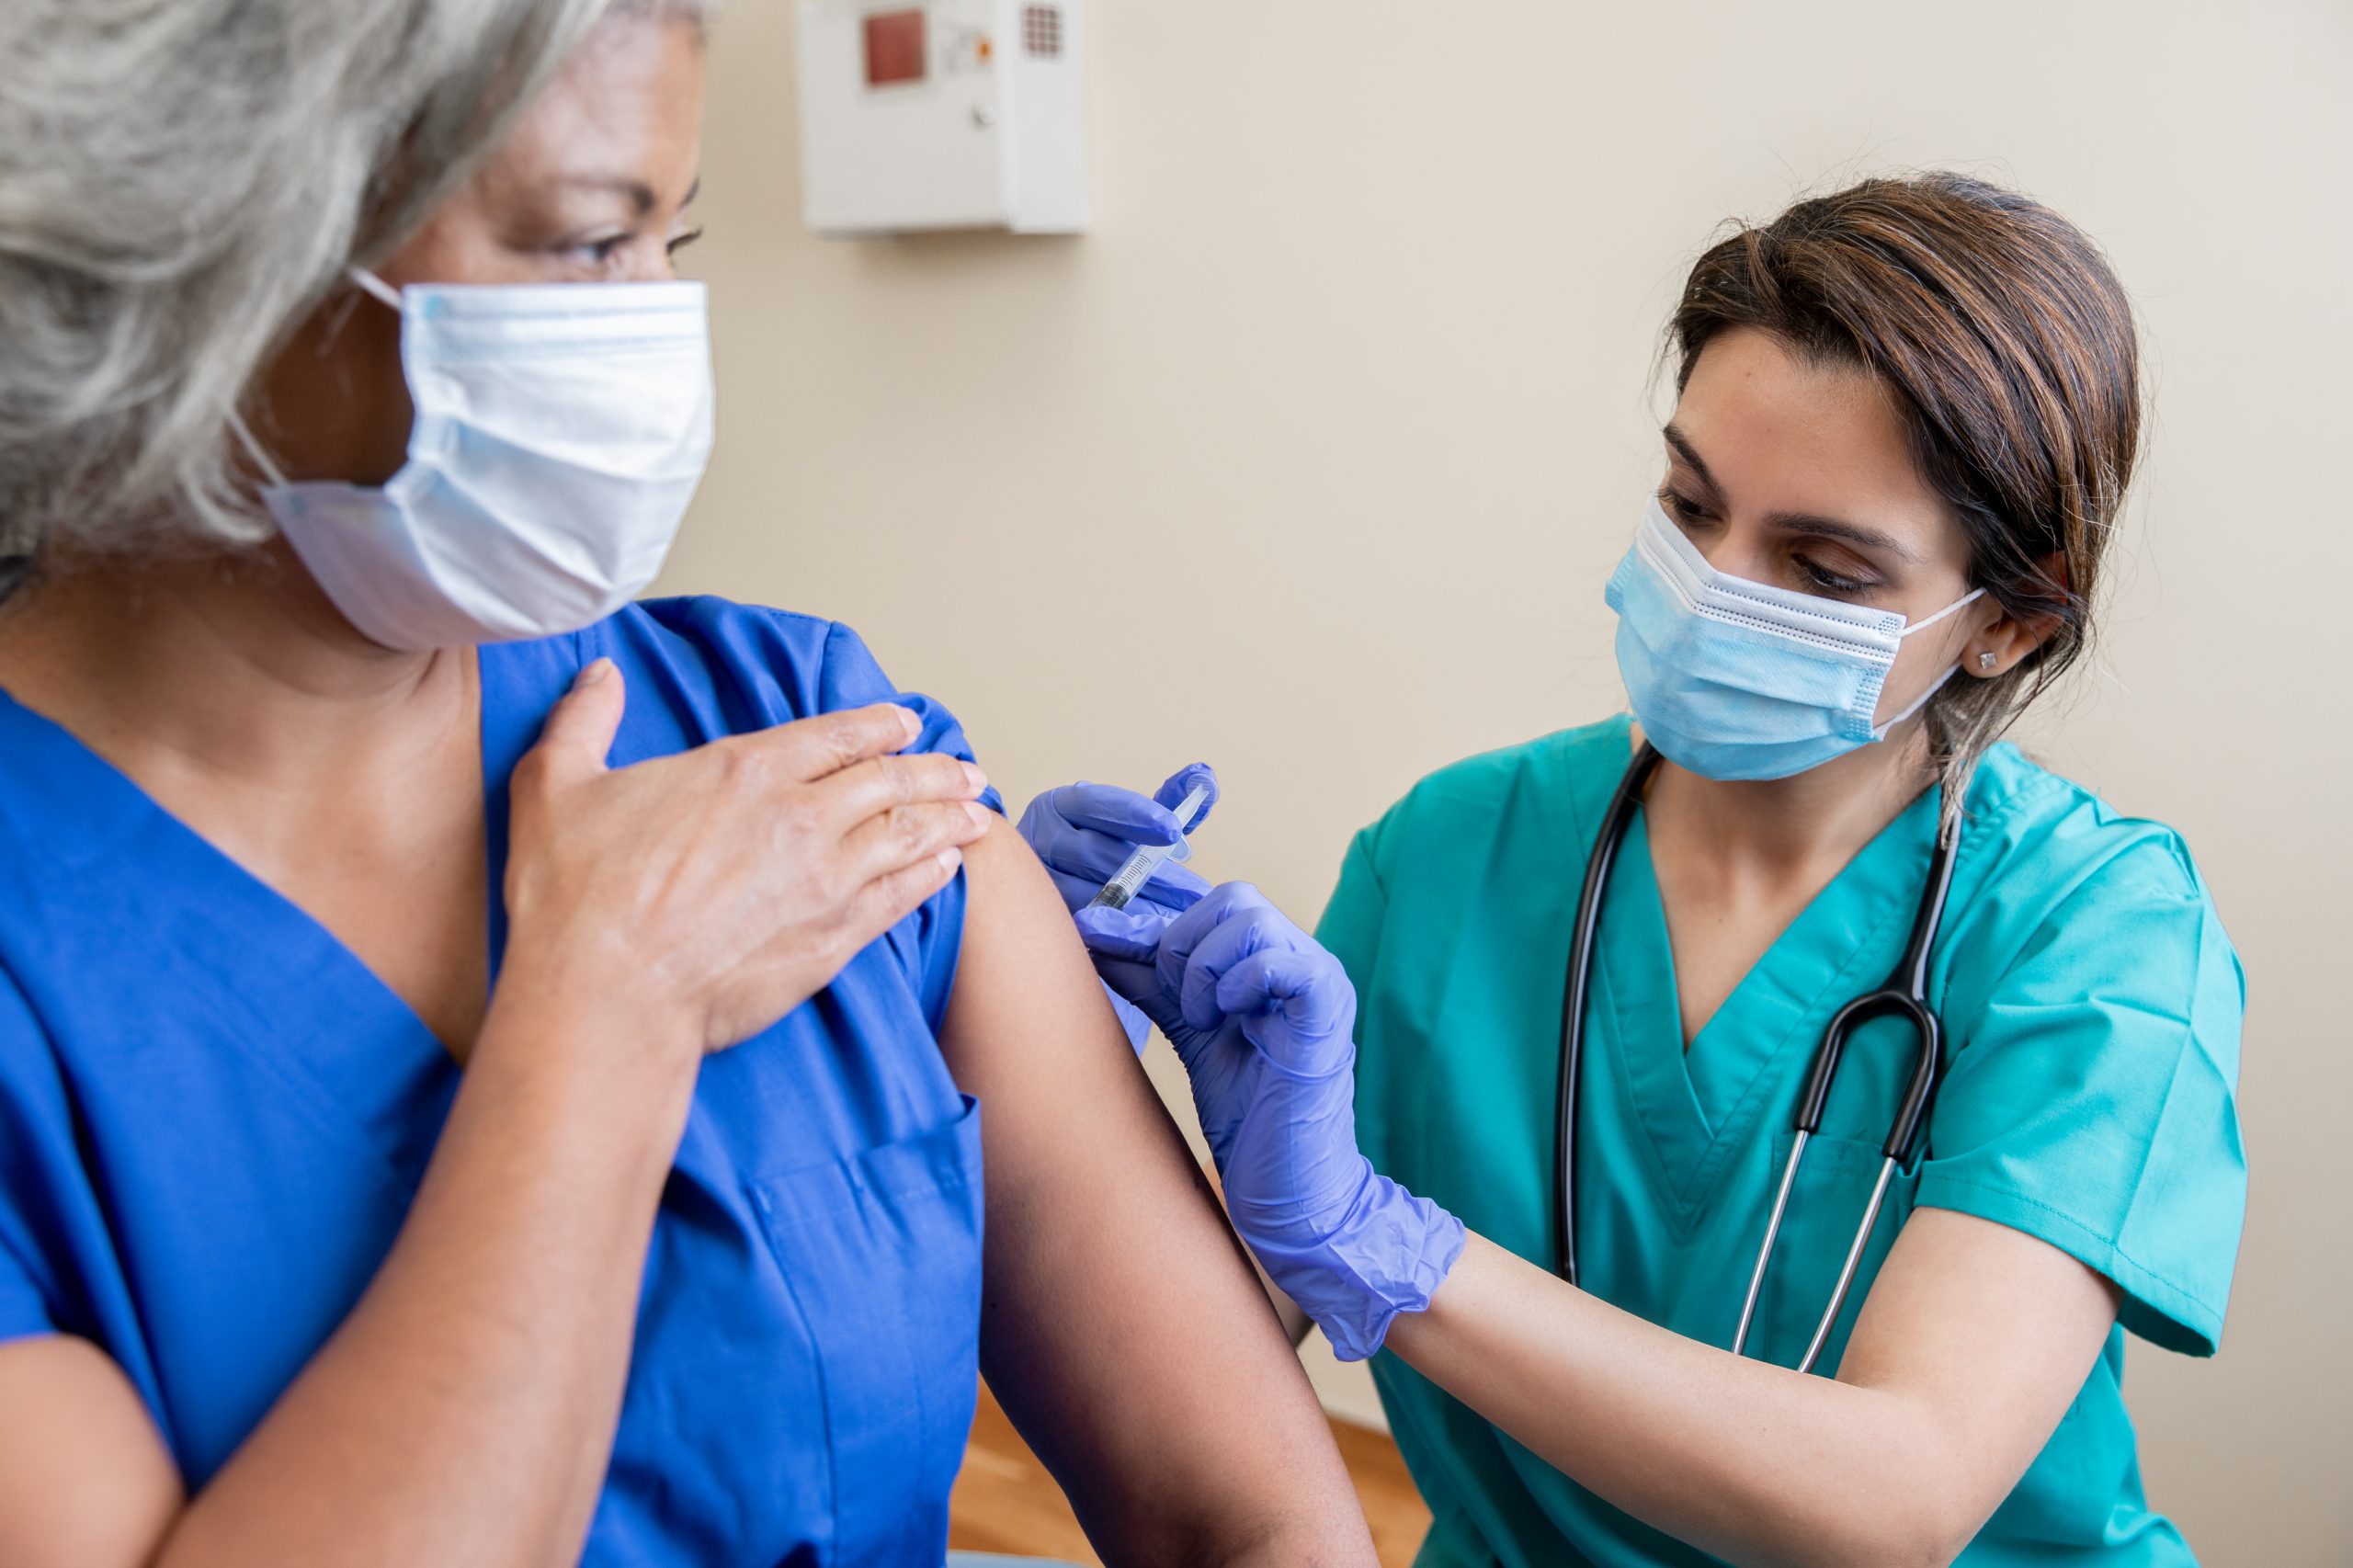 Physicians And Surgeons Top List Of Highest Vaccinated Health Professionals